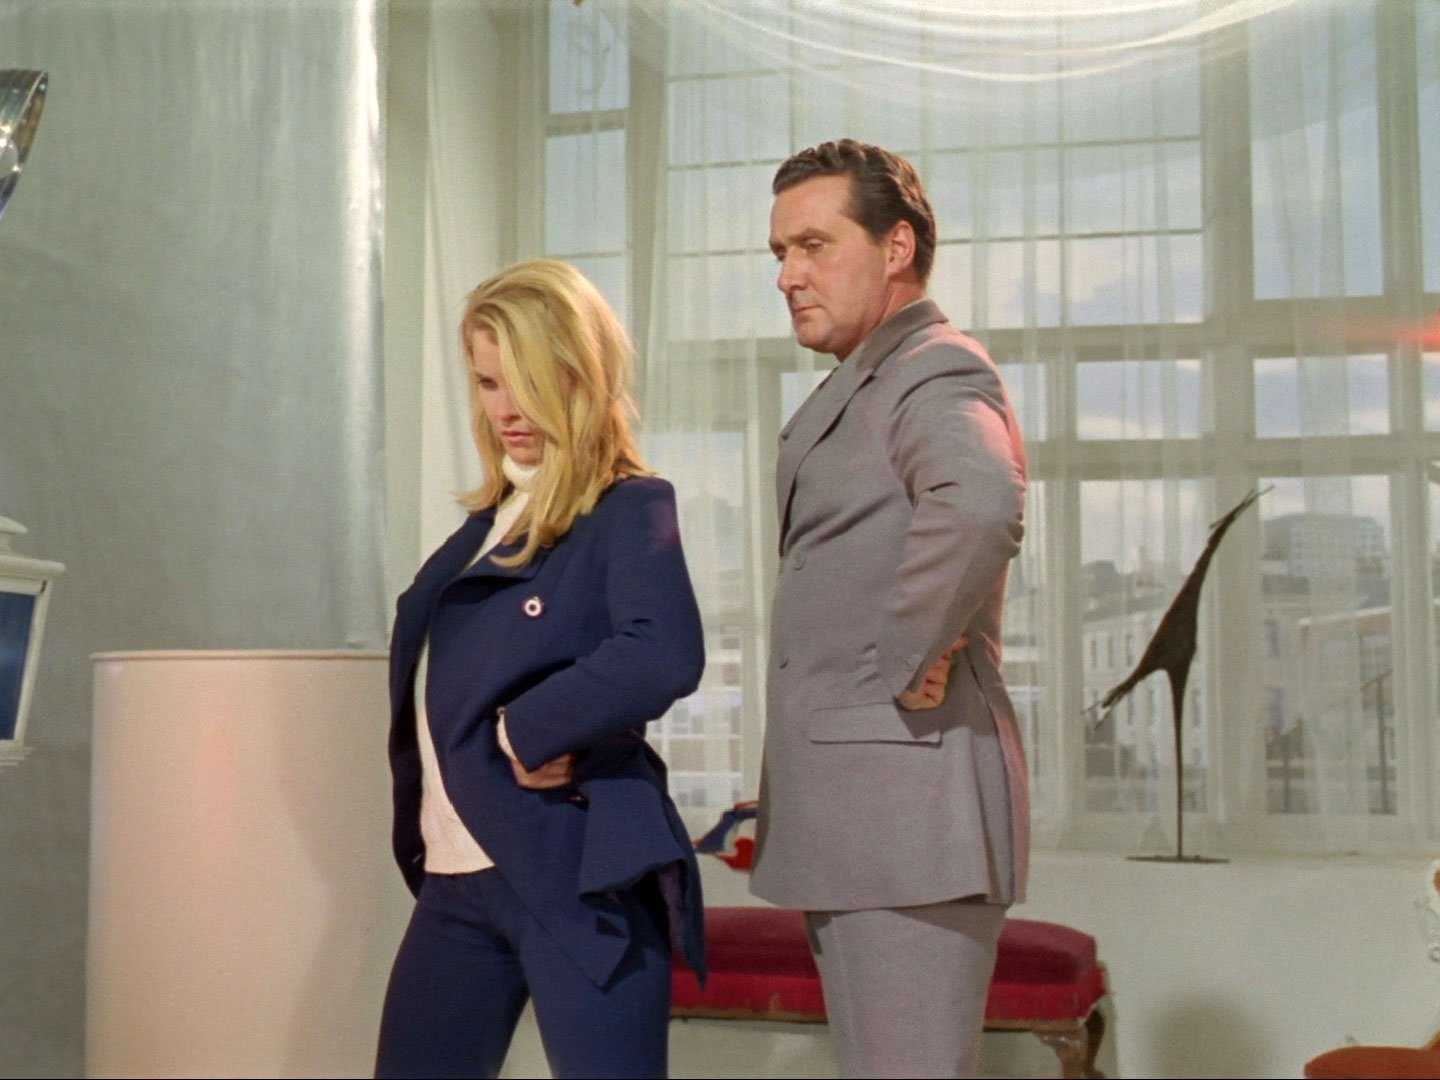 John Steed does some modelling with a blonde woman